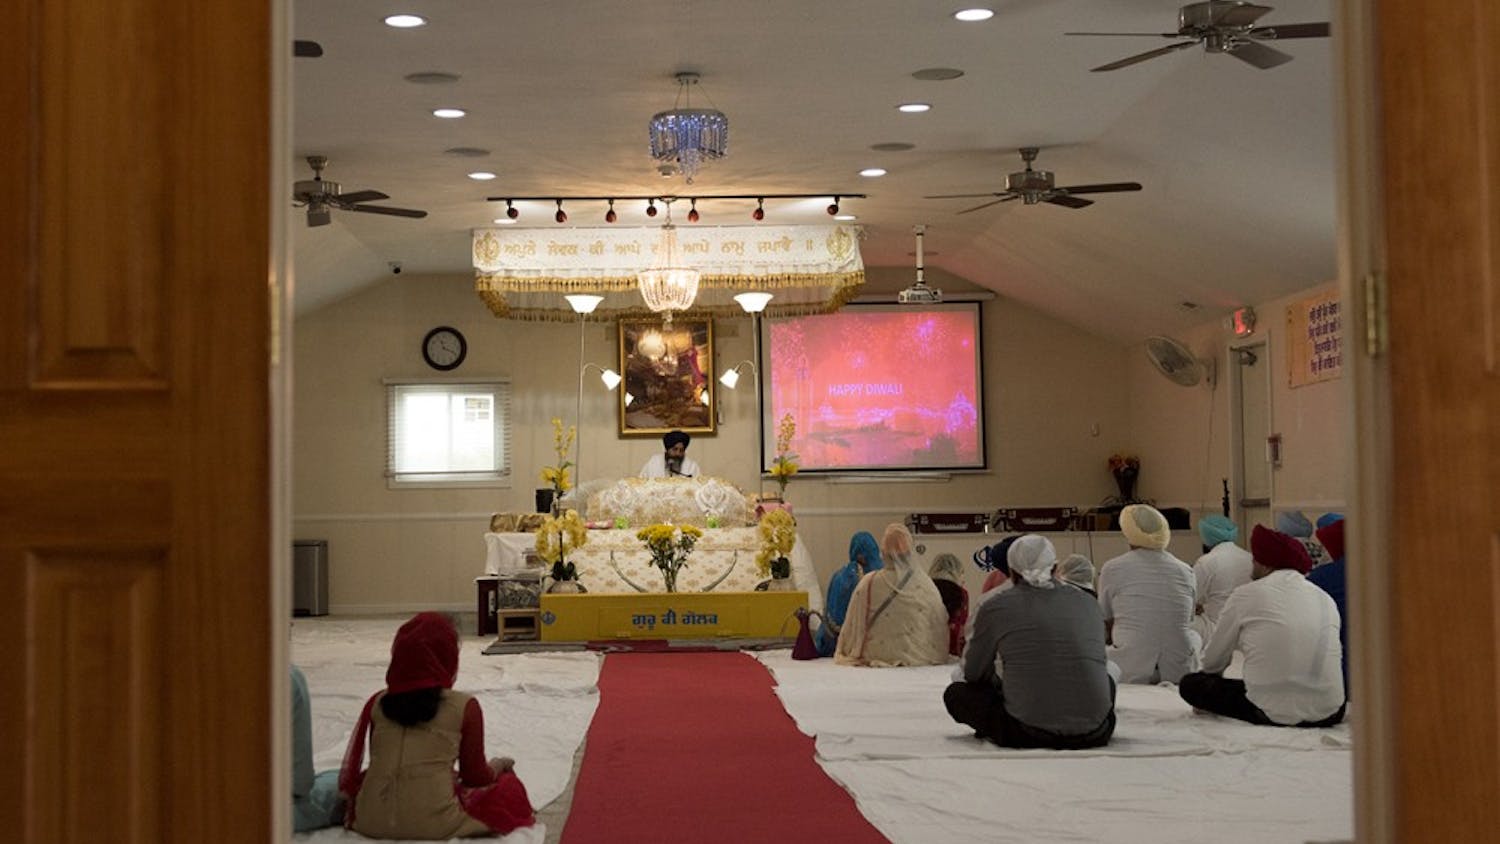 Sikhism practitioners in Fishers, Ind. attending a weekly religious ceremony where words from the Guru Granth Sahib are read. The Holy Book contains passages from the Quran and from the Old Testament. 